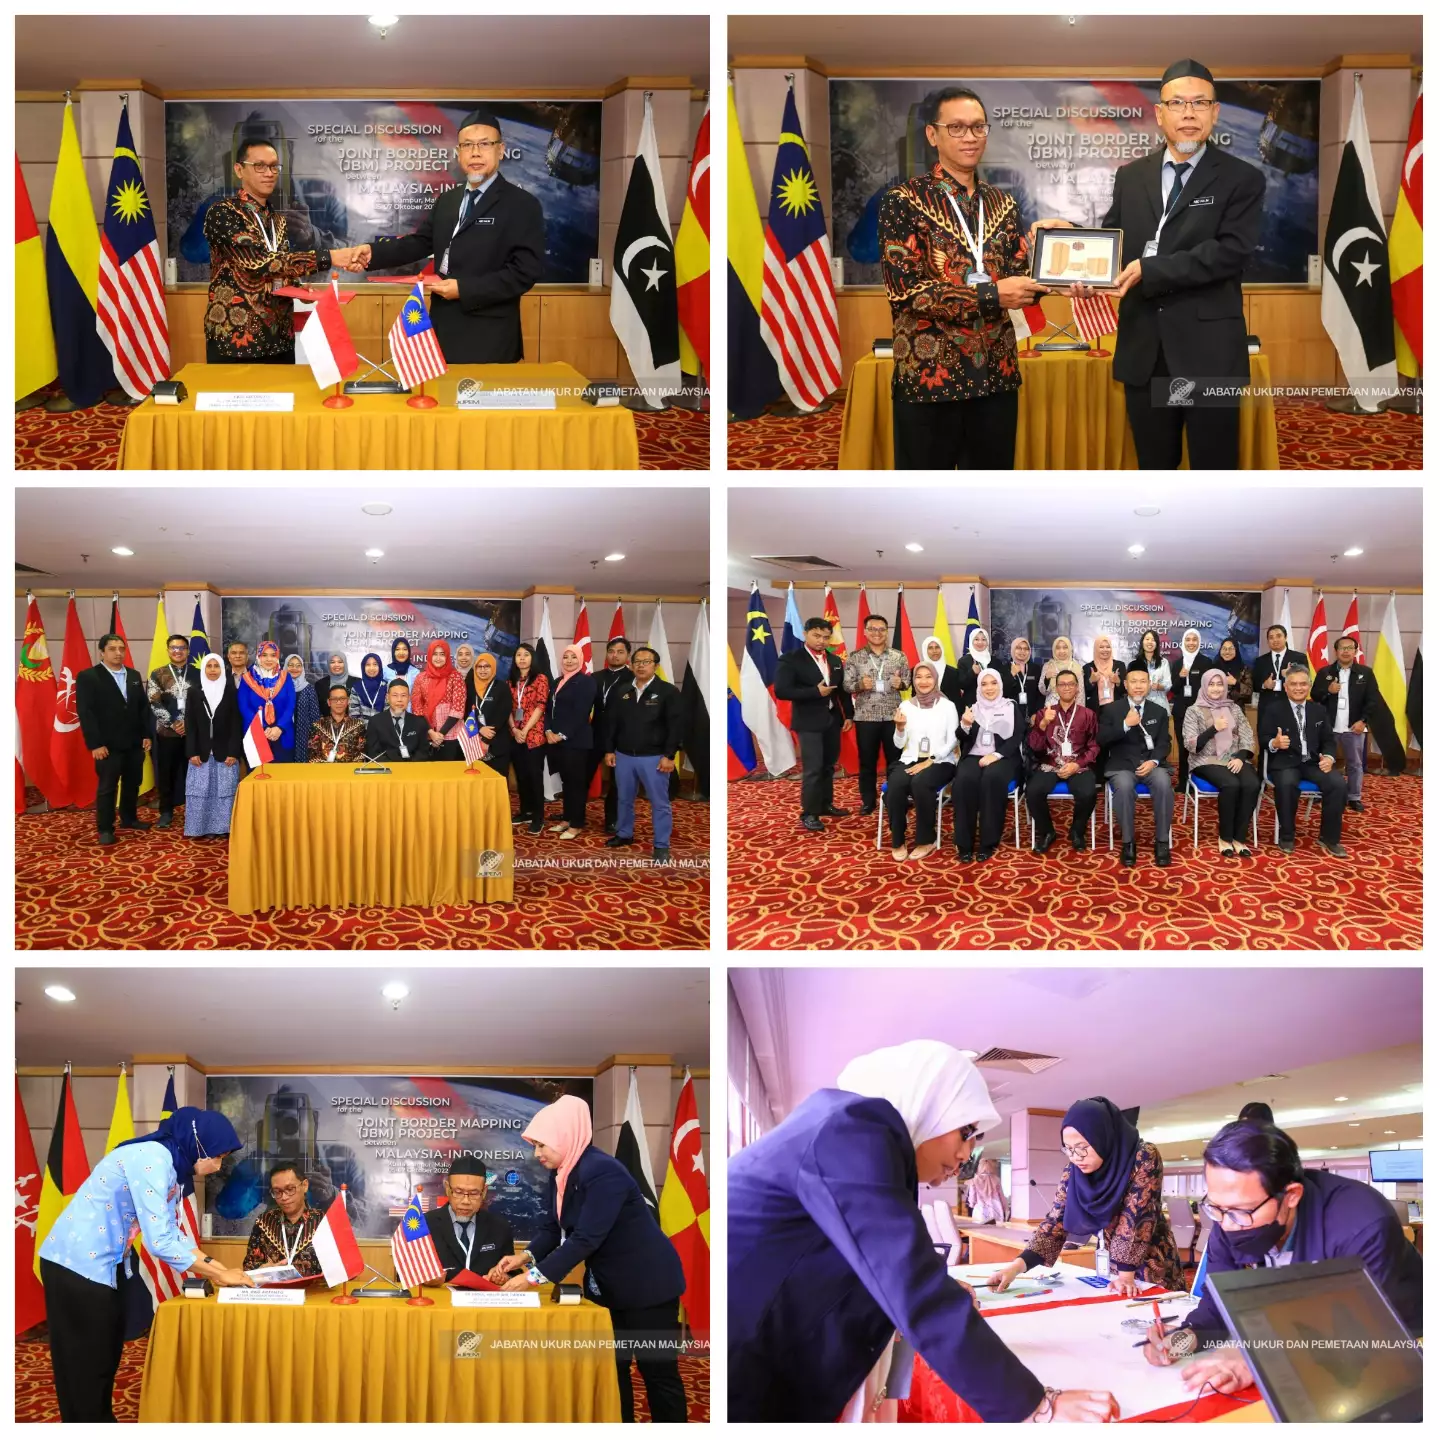 SPECIAL DISCUSSION FOR THE JOINT BORDER MAPPING PROJECT BETWEEN MALAYSIA & INDONESIA (JBM) | 5-7 OKTOBER 2022